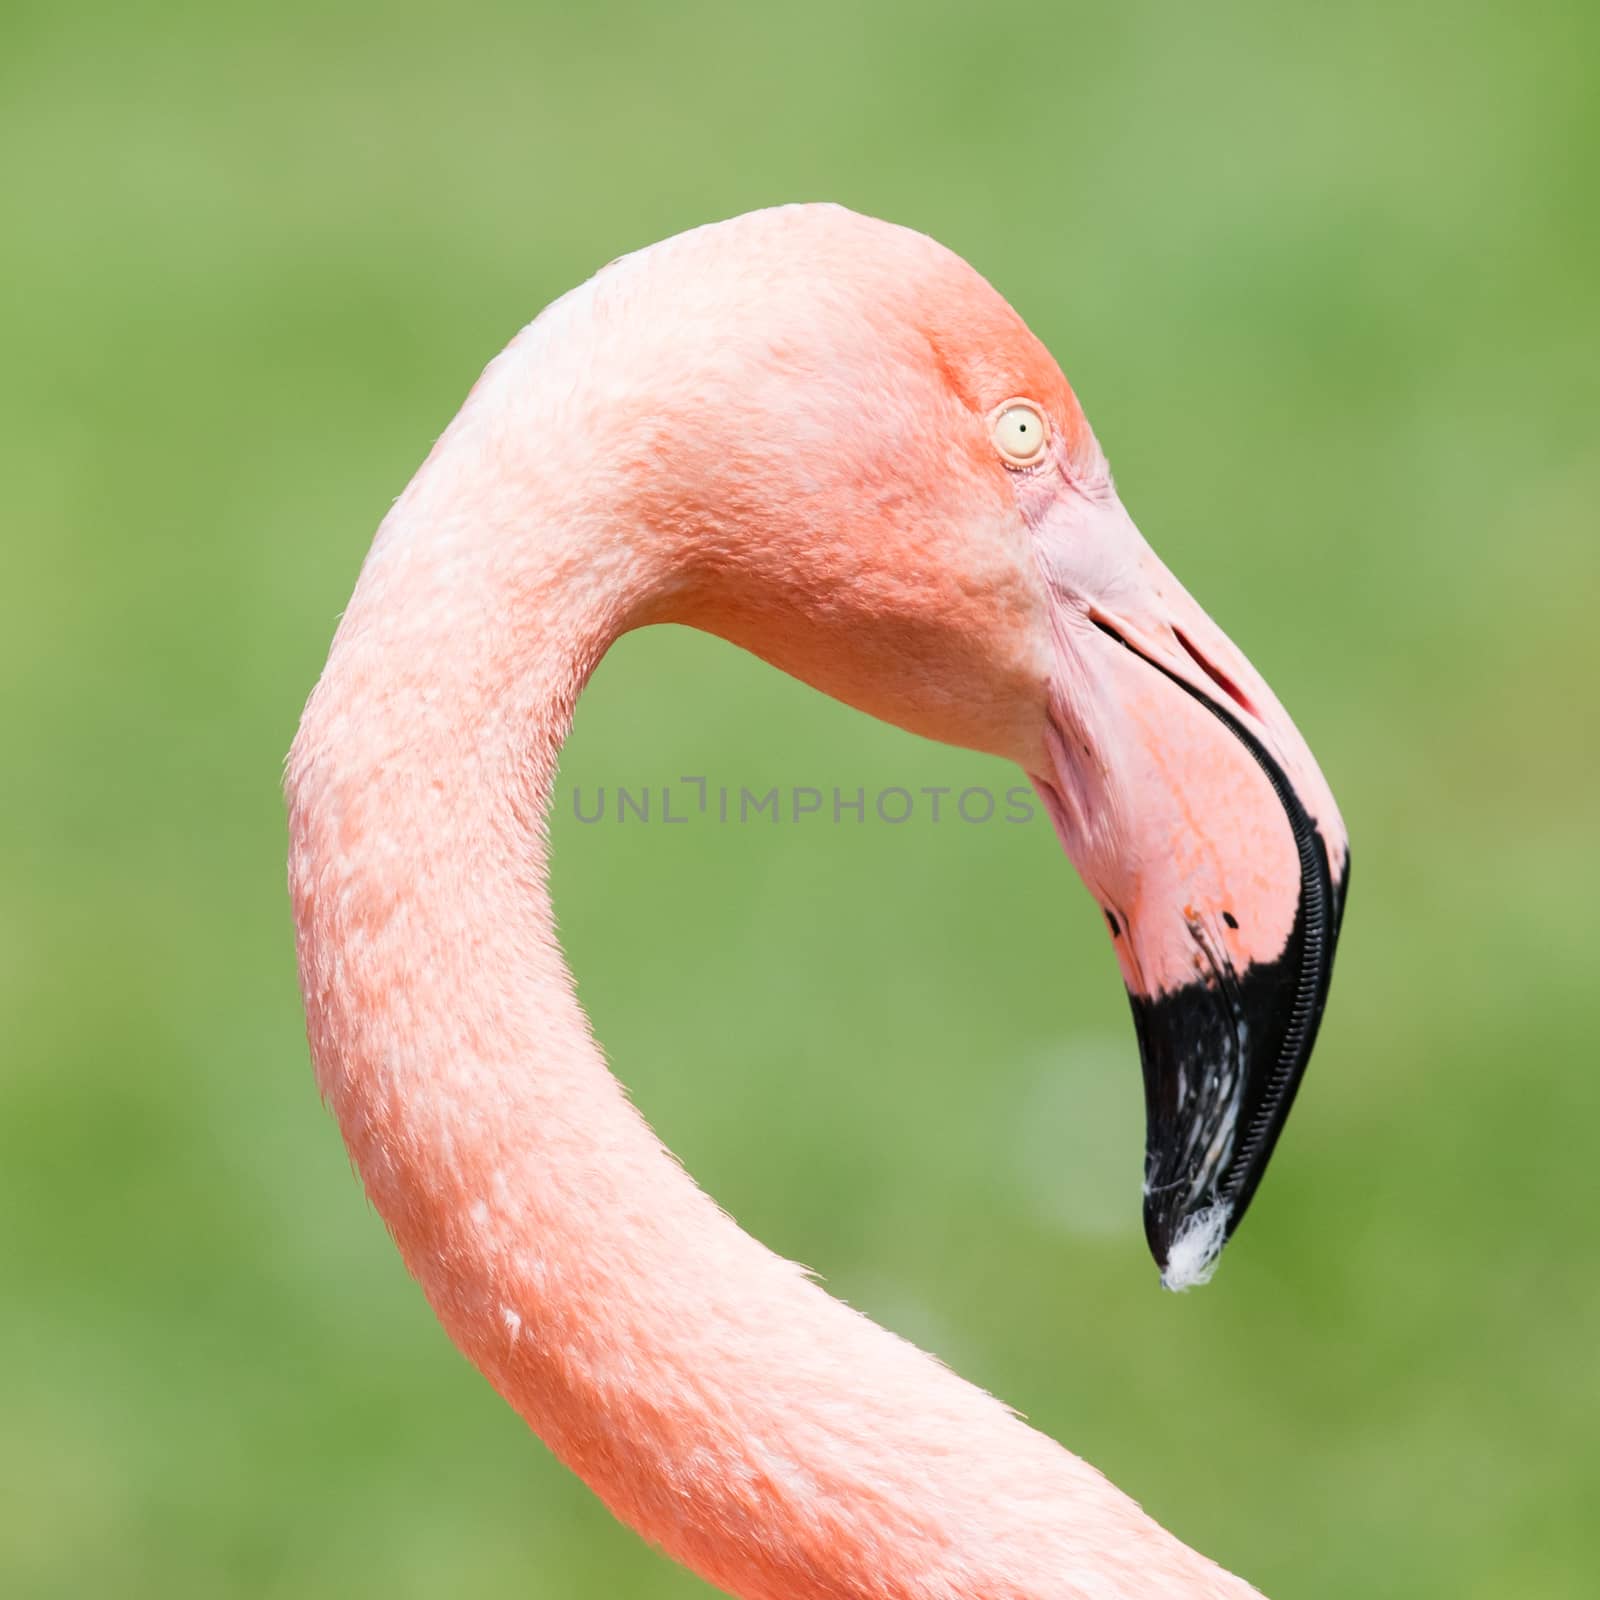 Pink flamingo close-up, isolated on green grass background